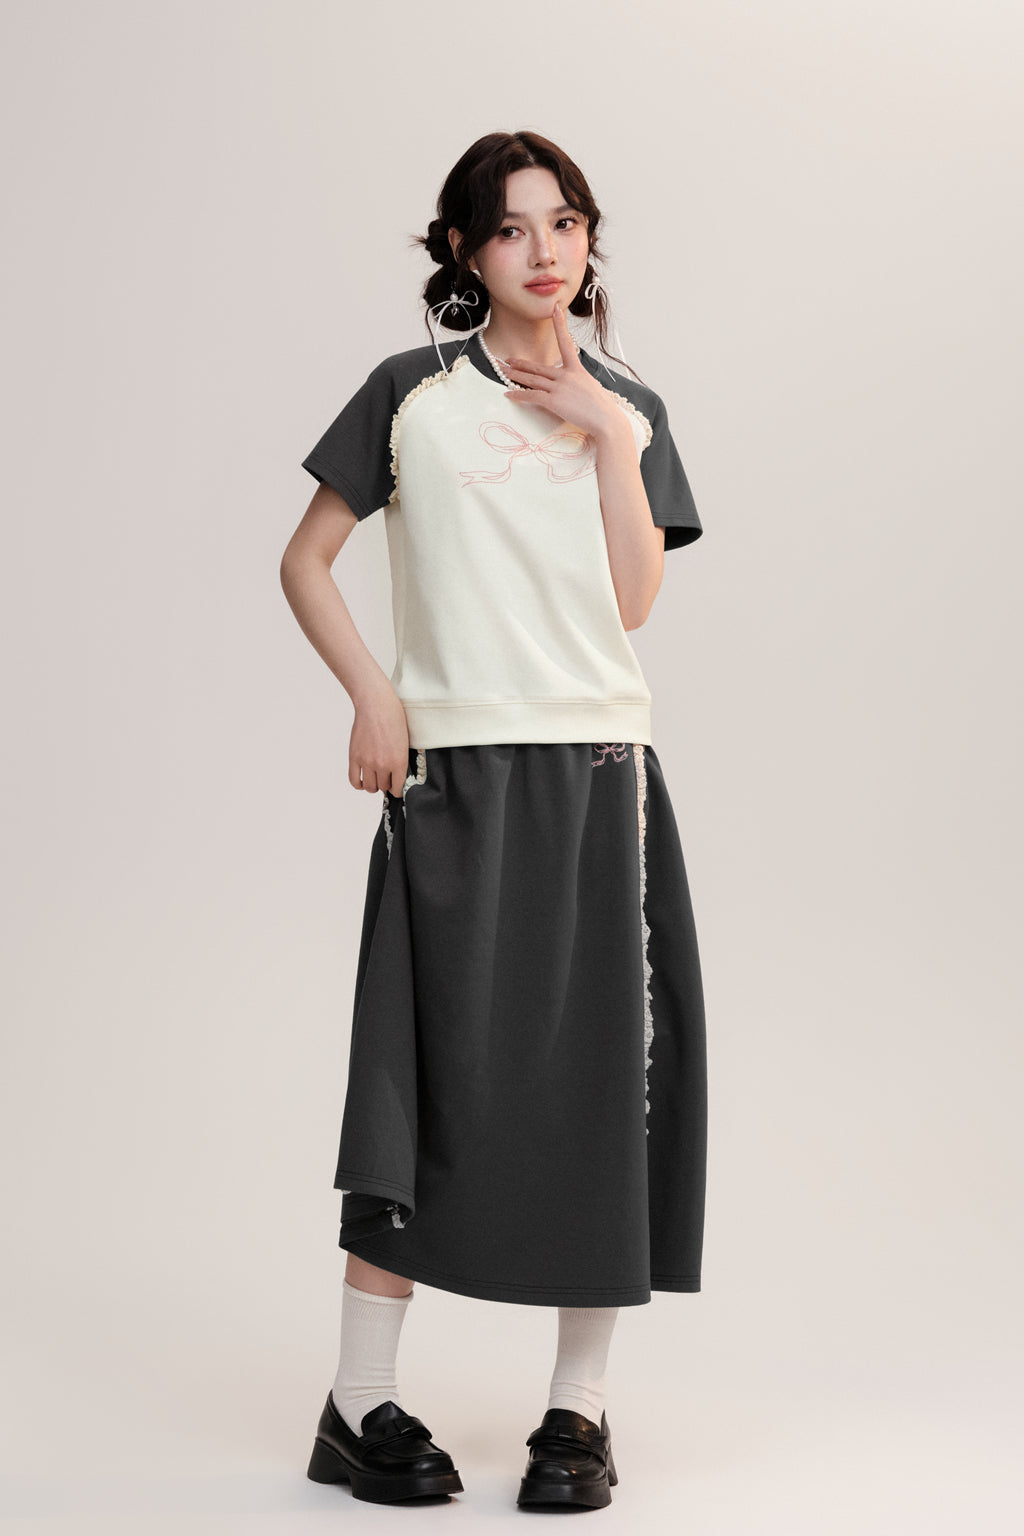 Lace Bow Short Sleeve T-shirt/Skirt AOO0024